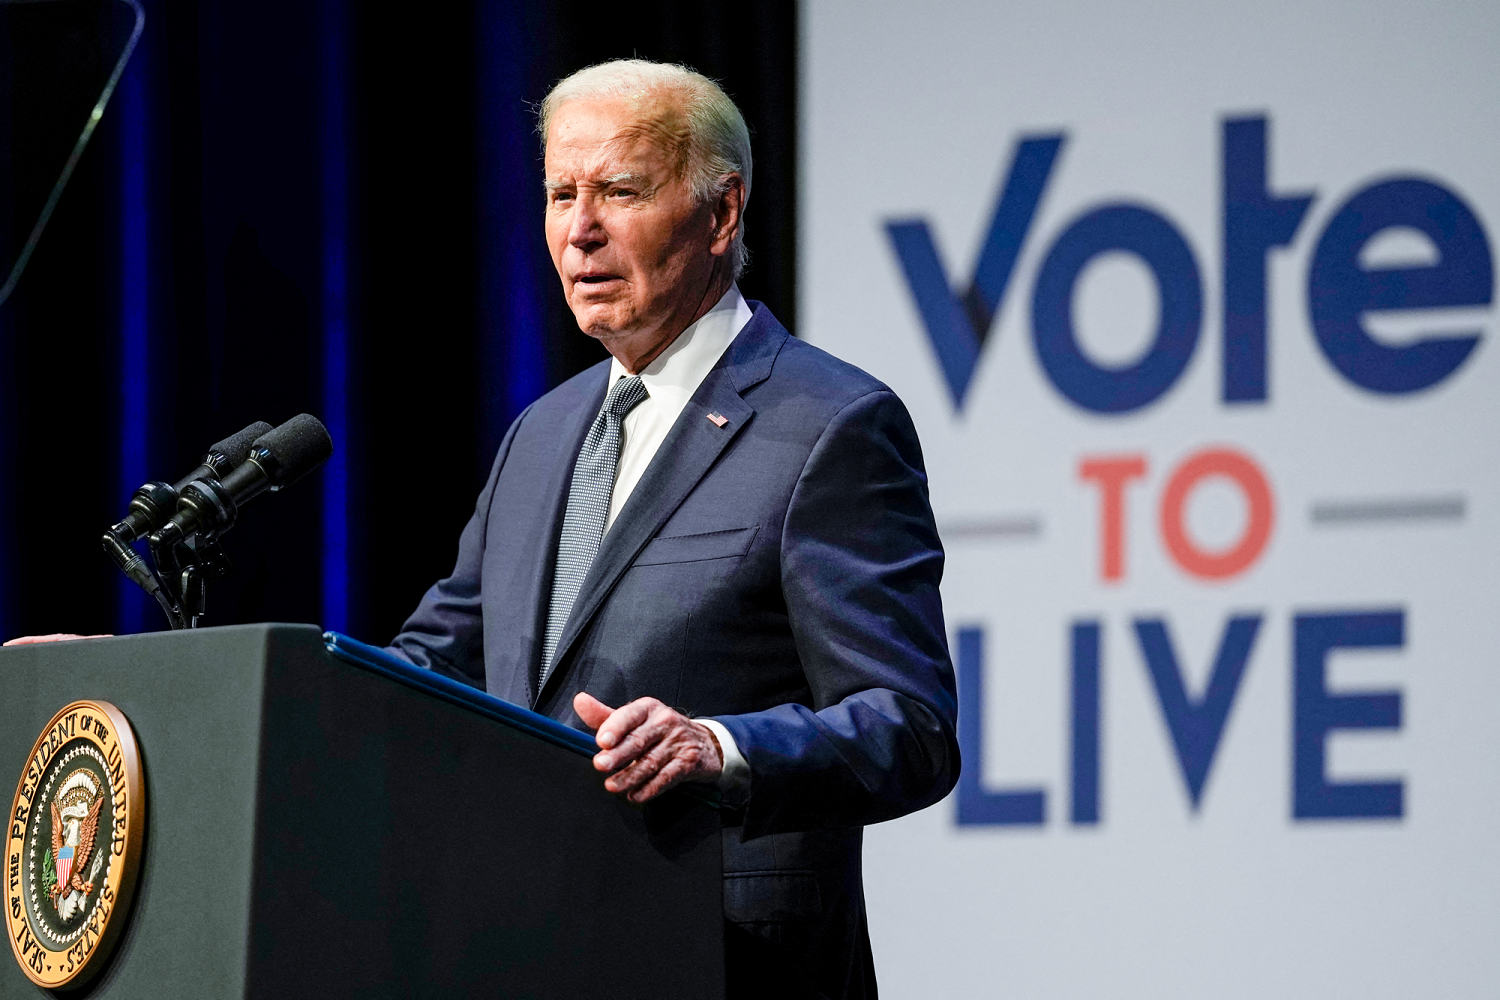 Democrats plan to formally nominate Biden in early August, ahead of convention